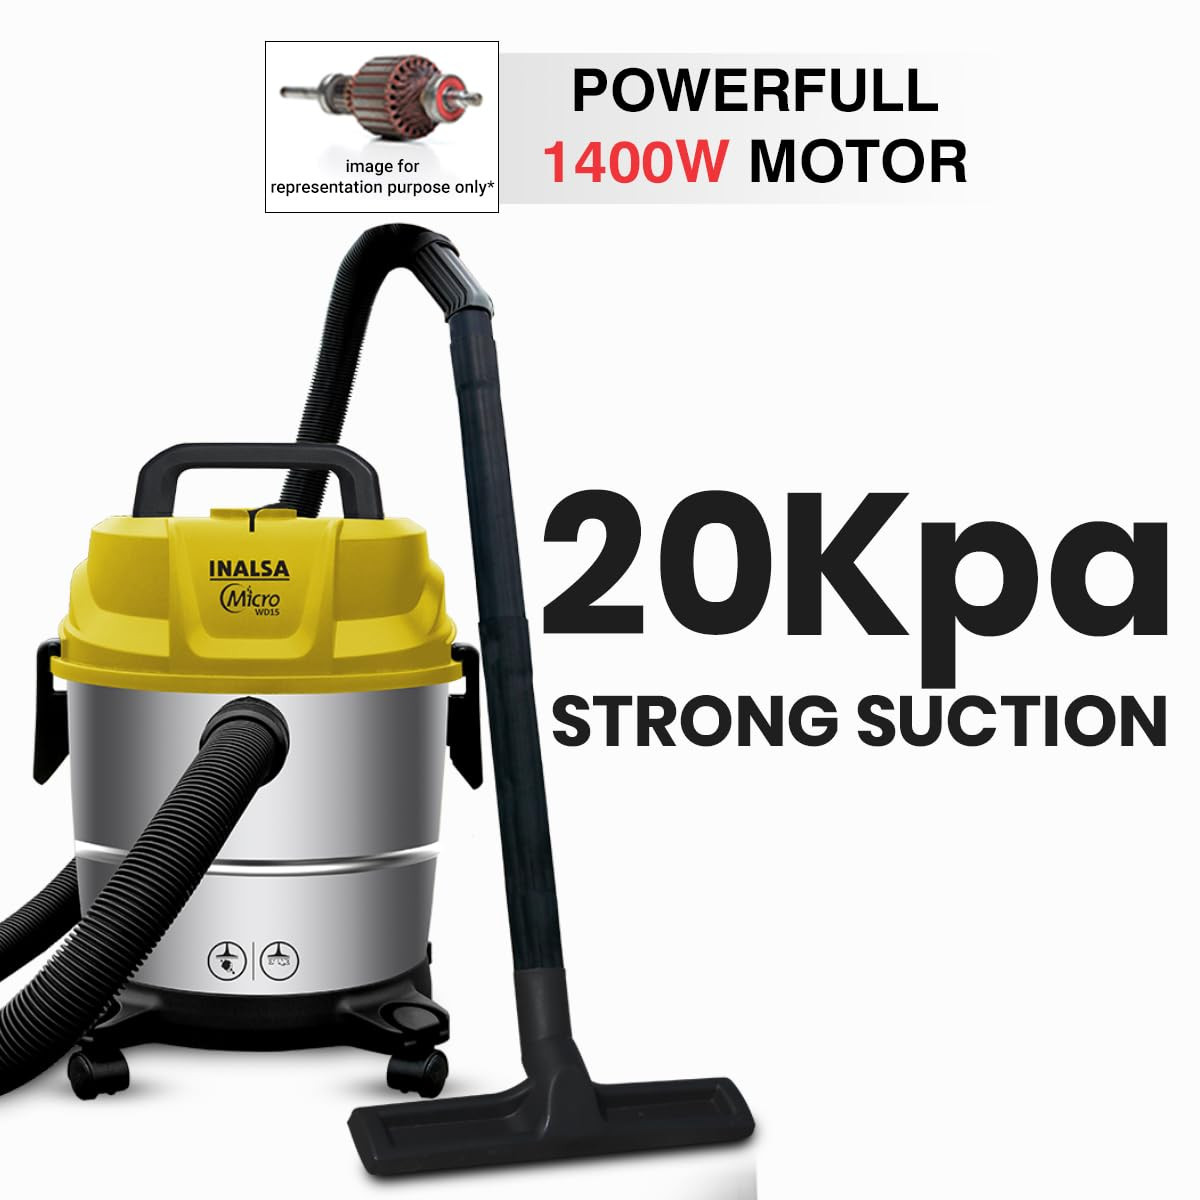 INALSA Wet and Dry Vacuum Cleaner for Home 15 ltr Capacity1400 W 20 kPa Suction  Blower FunctionHEPA Filter Wet Vacuum Cleaner for Sofa House Cleaning MachineStainless Steel Body WD 15